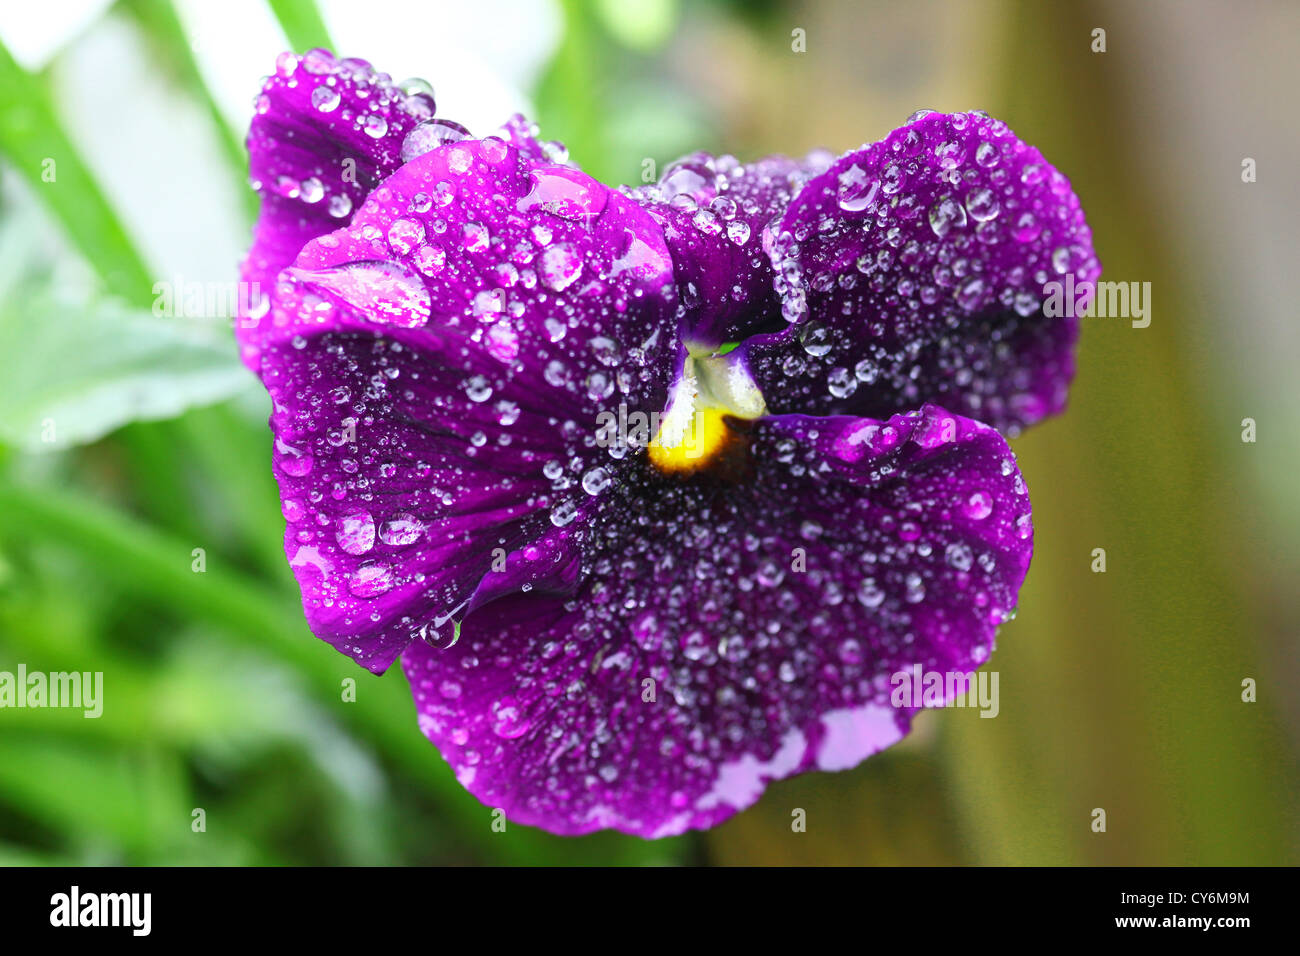 A purple winter flowering pansy covered in rain drops Stock Photo